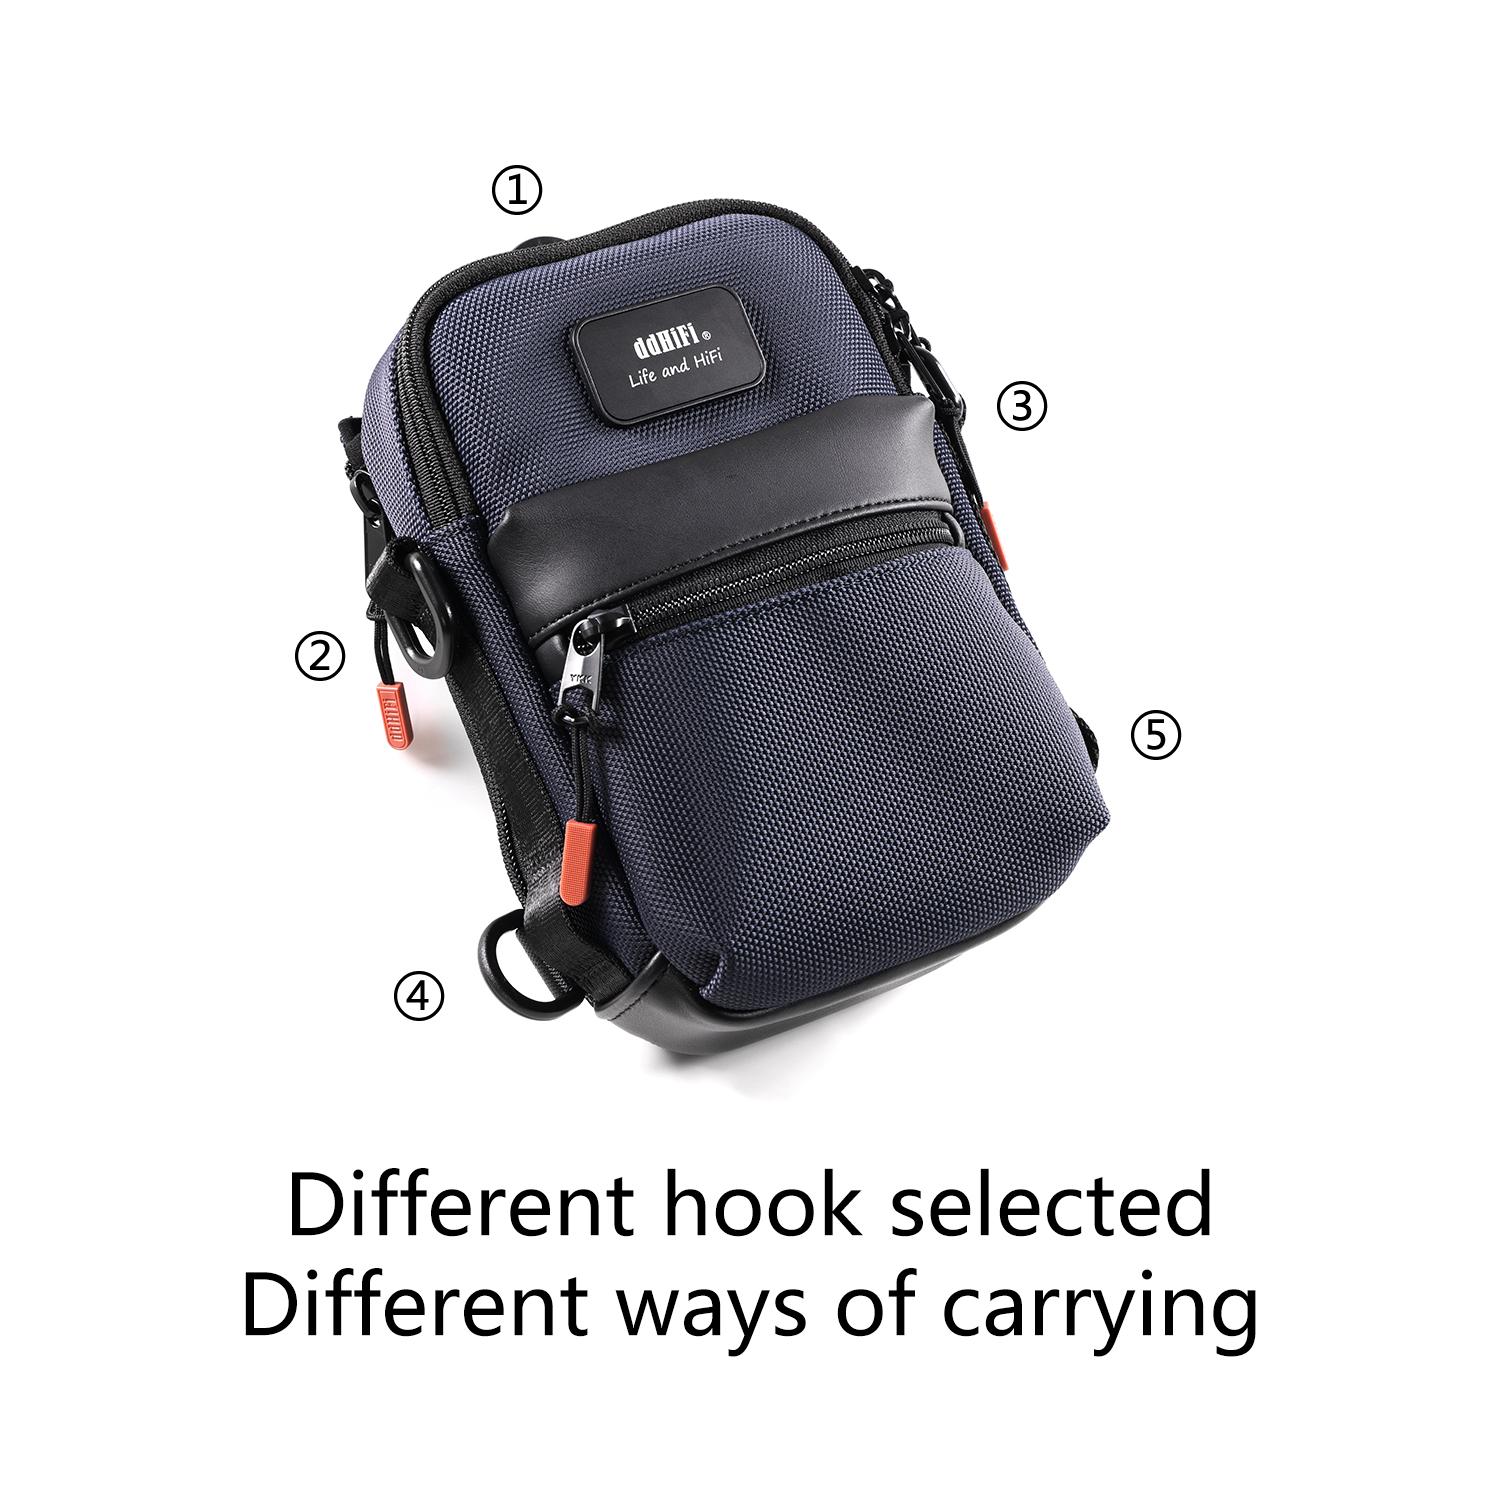 DD ddHiFi different hooks for different ways of carrying